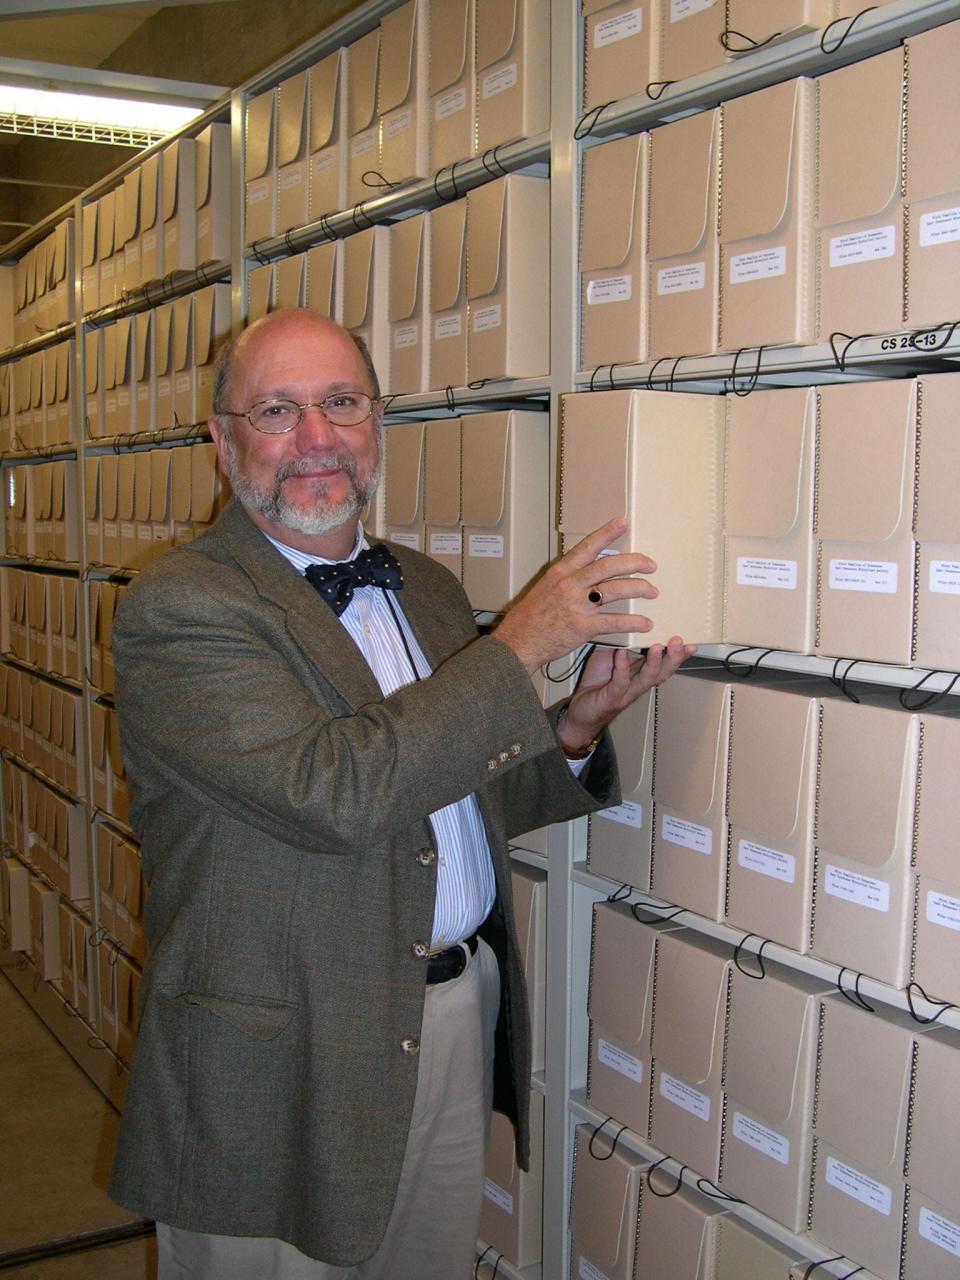 Steve Cotham looking through the archives of the McClung Historical Collection